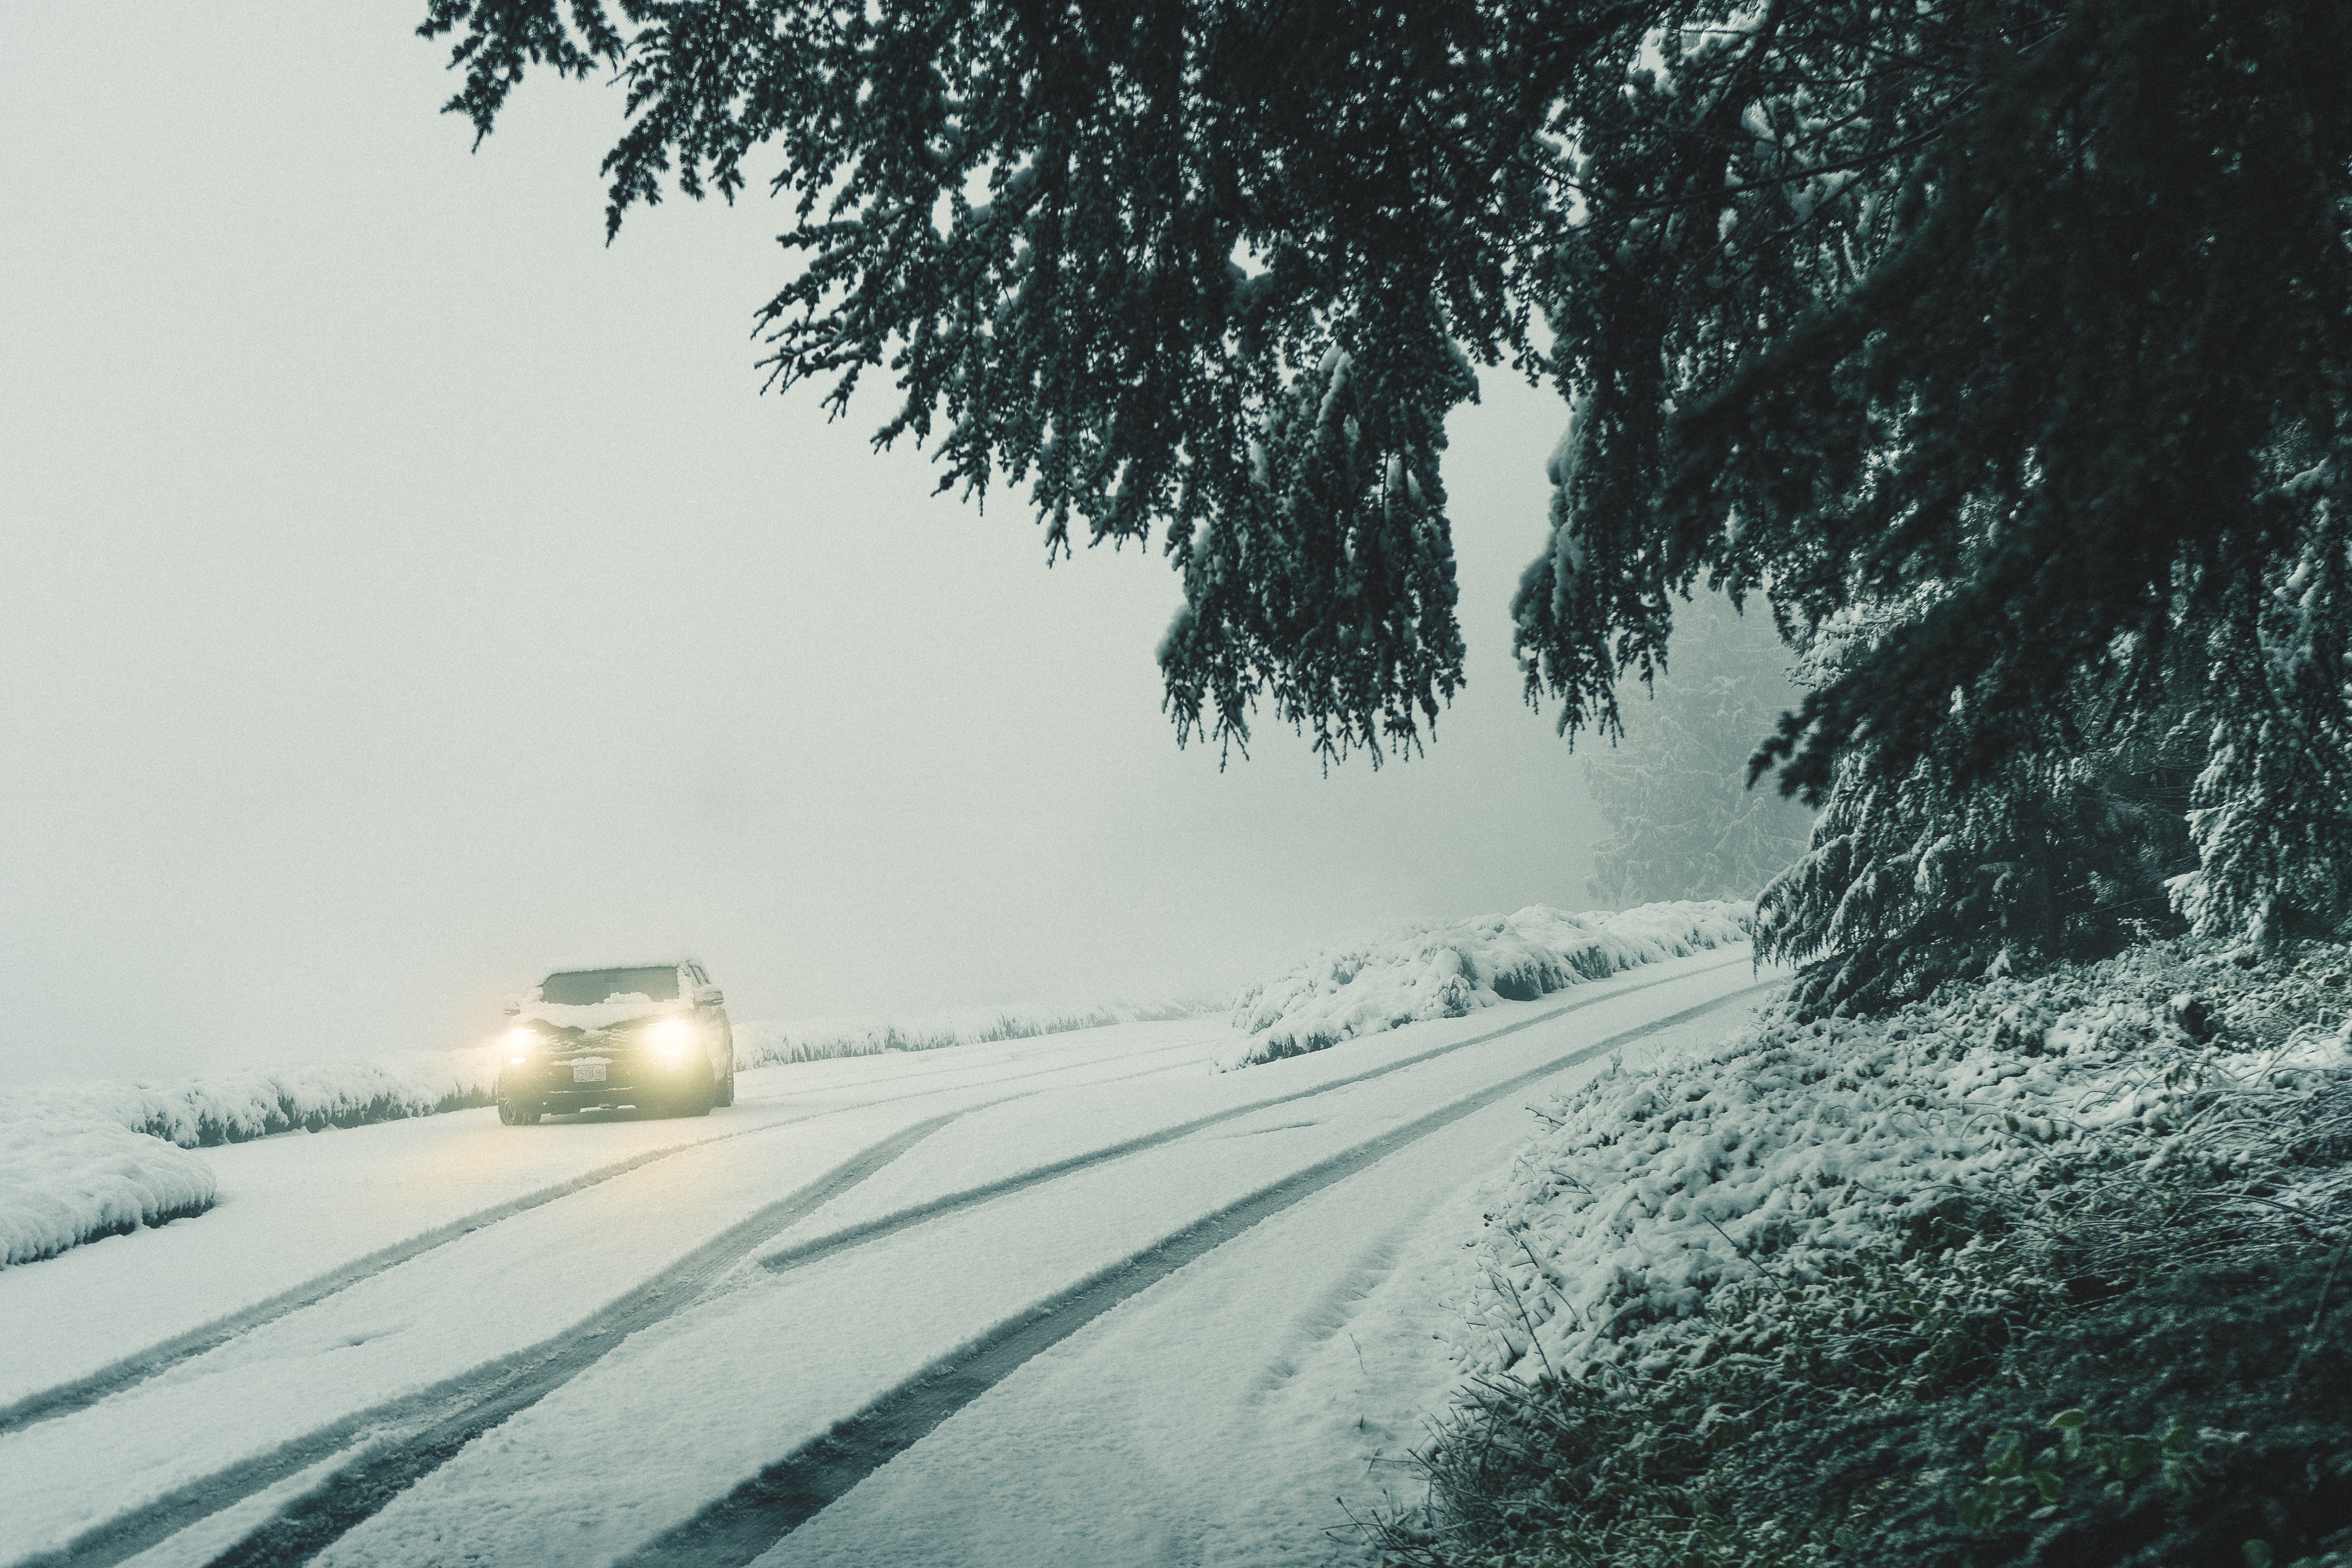 How to fix 5 common car problems in winter